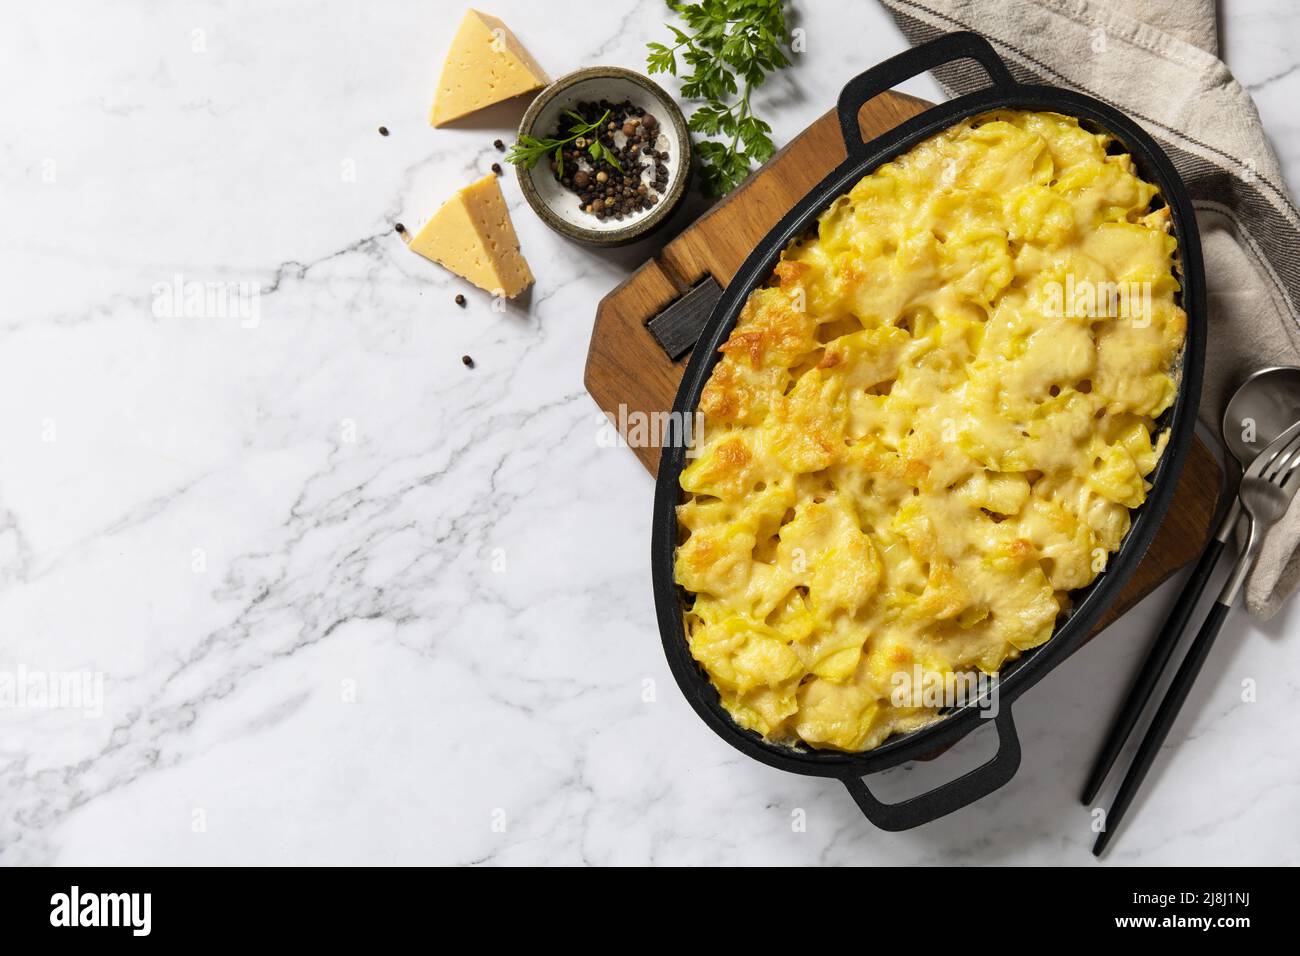 Potato gratin, french cuisine. Healthy casserole or gratin with cream, gratin dauphinois on a gray stone table. Top view flat lay. Copy space. Stock Photo